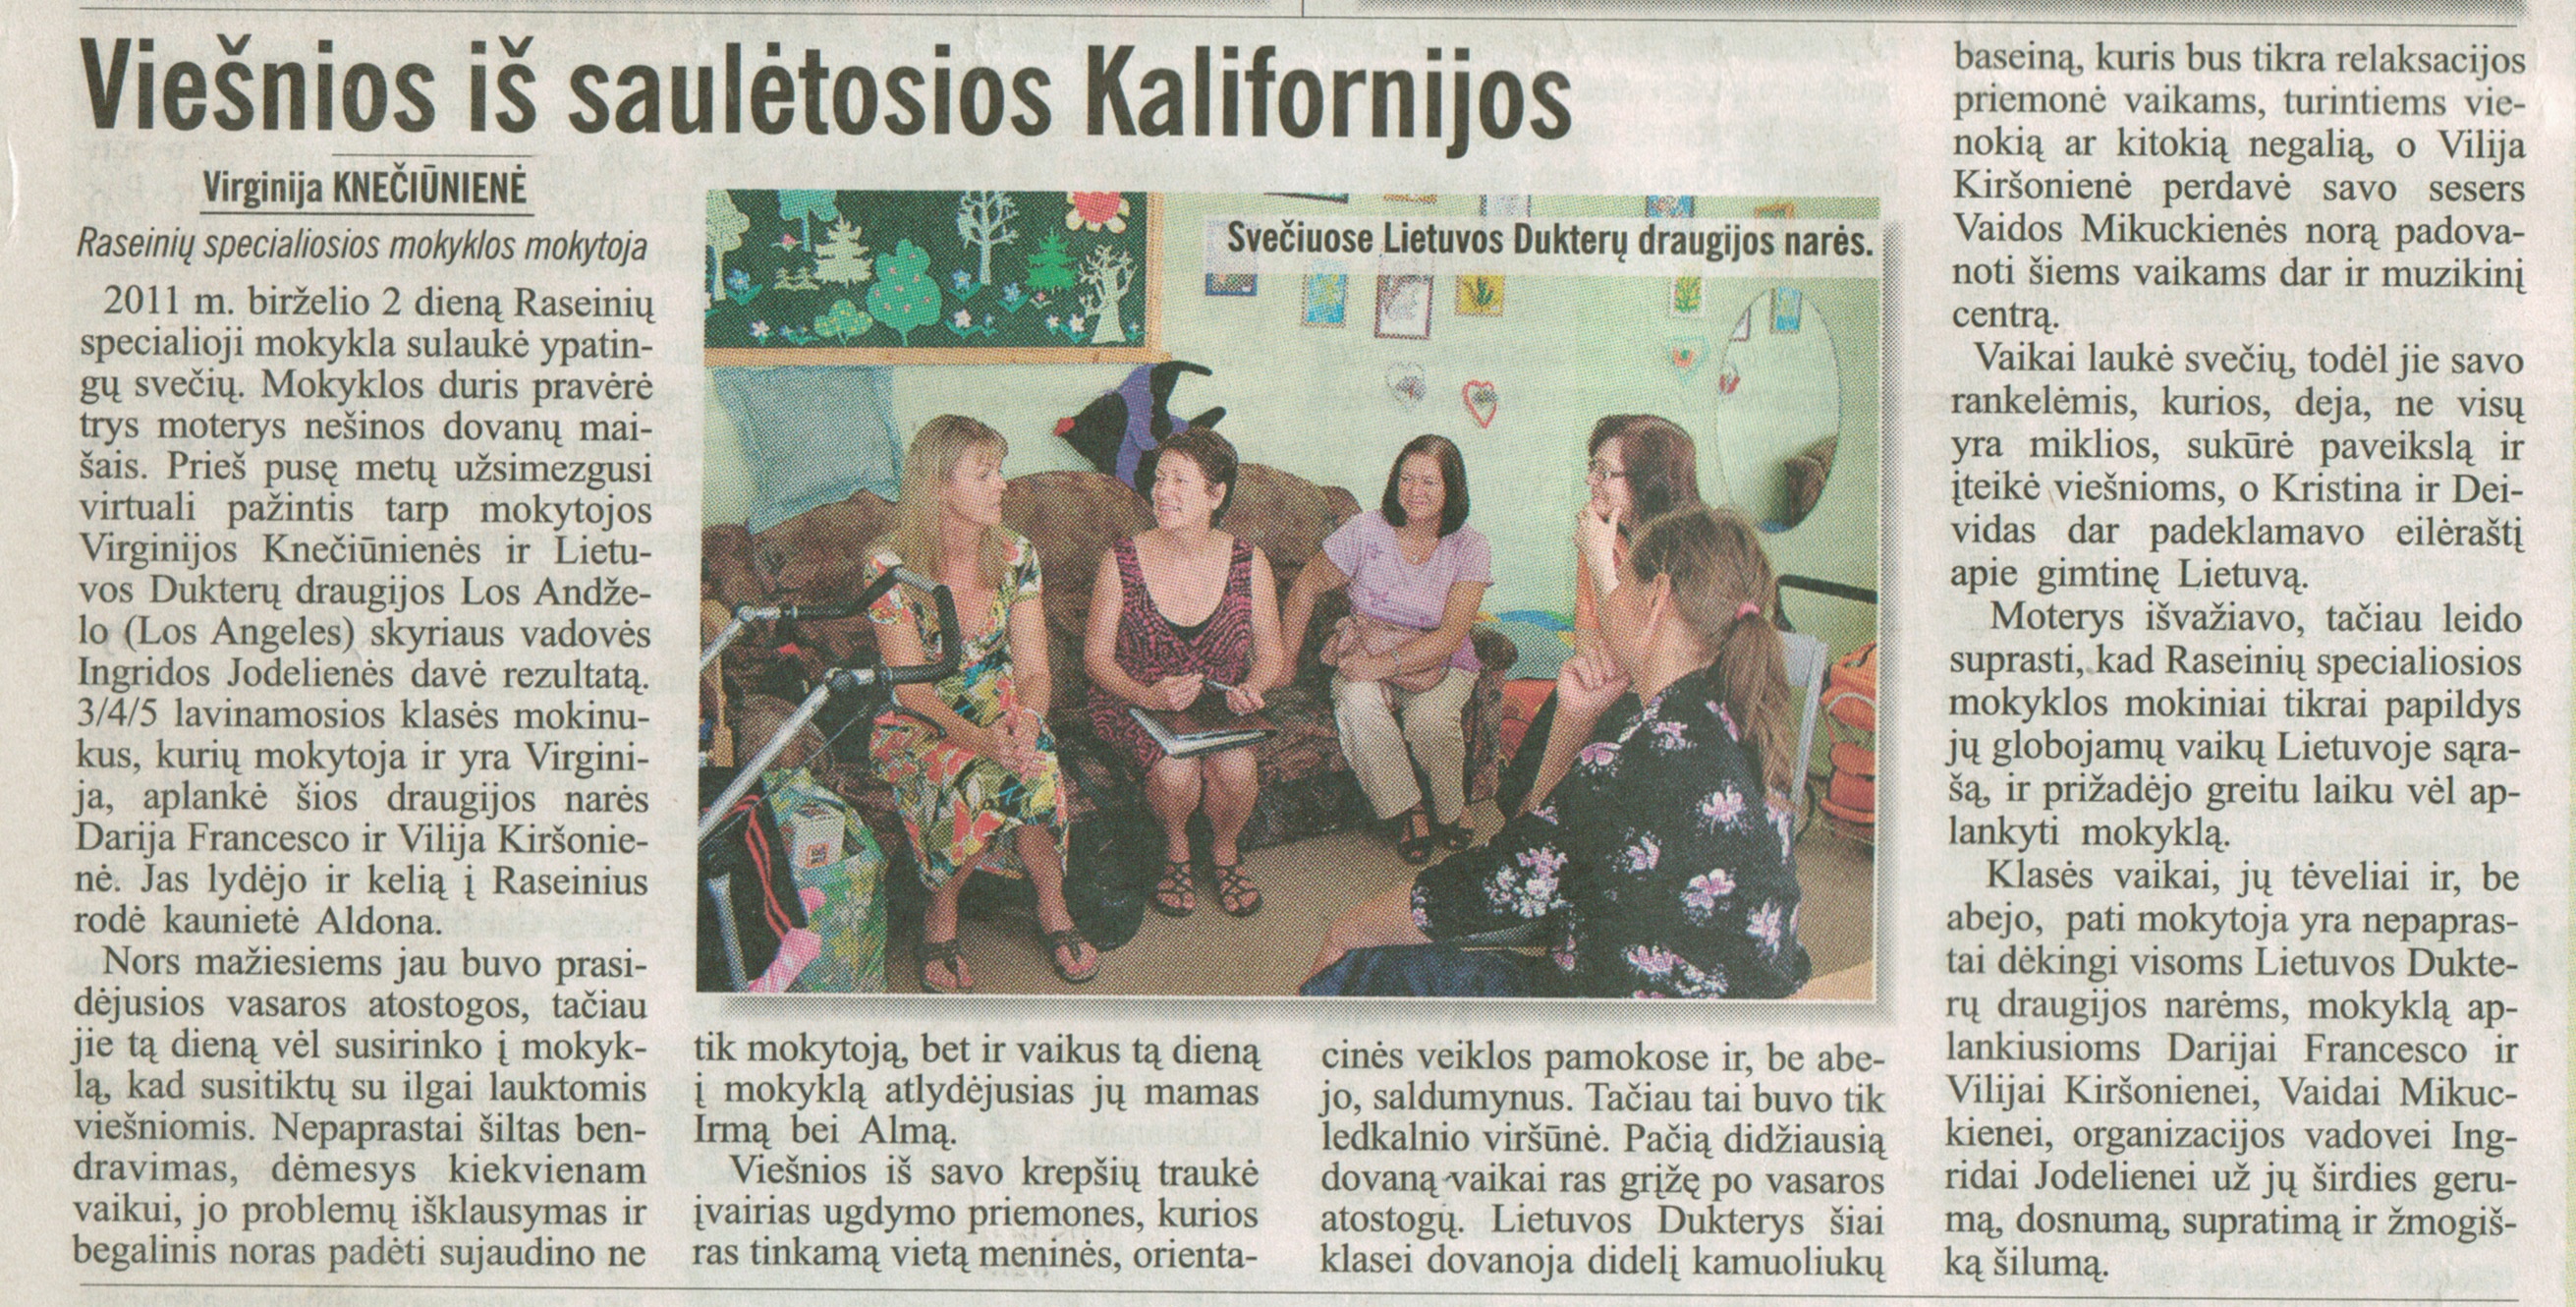 Daughters’ June 2011 visit published in local Lithuanian newspaper